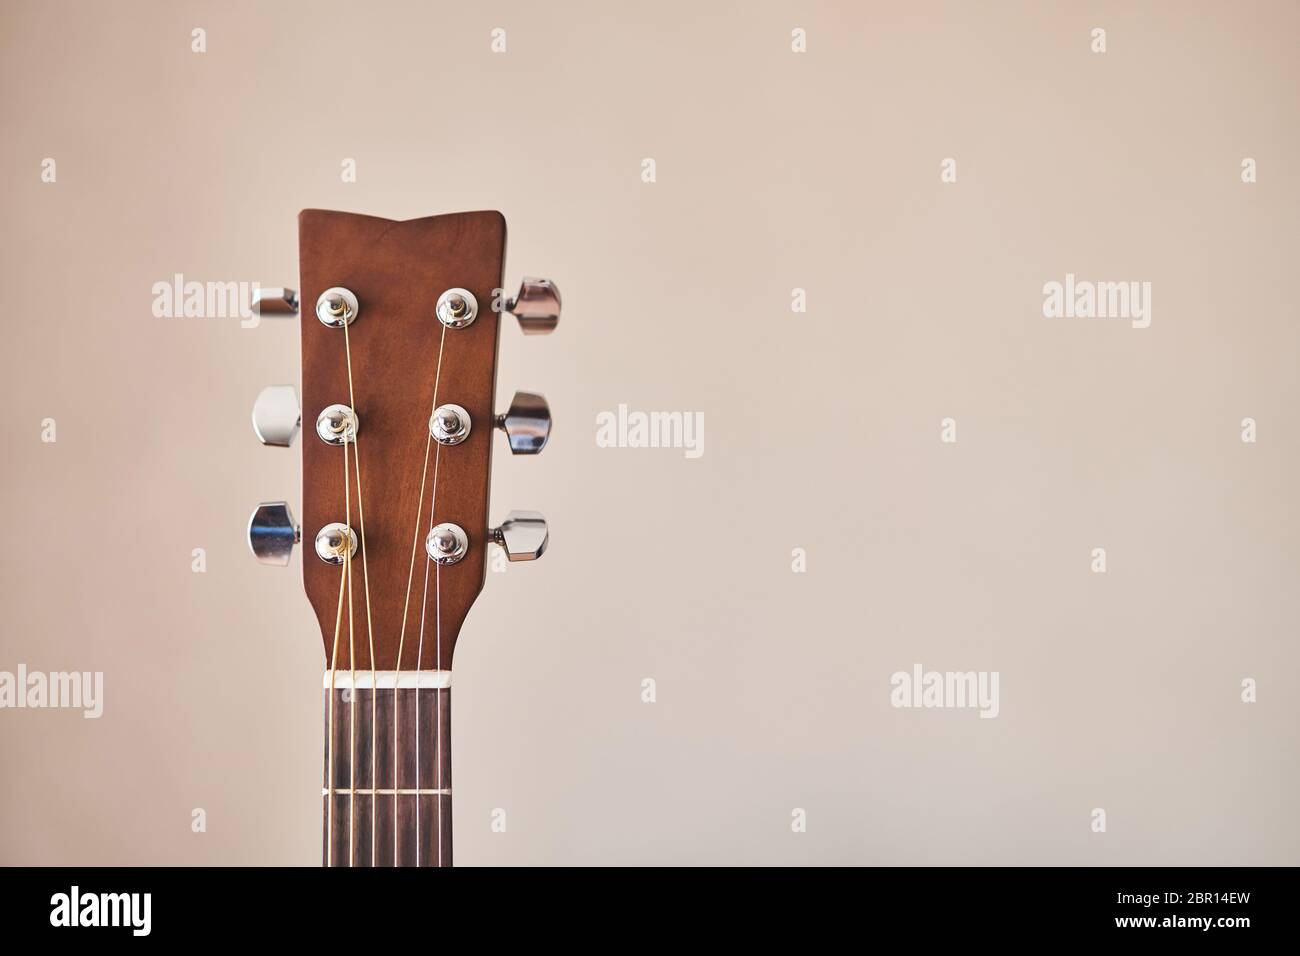 Acoustic guitar headboard with pegs. Guitar fretboard.  Stock Photo